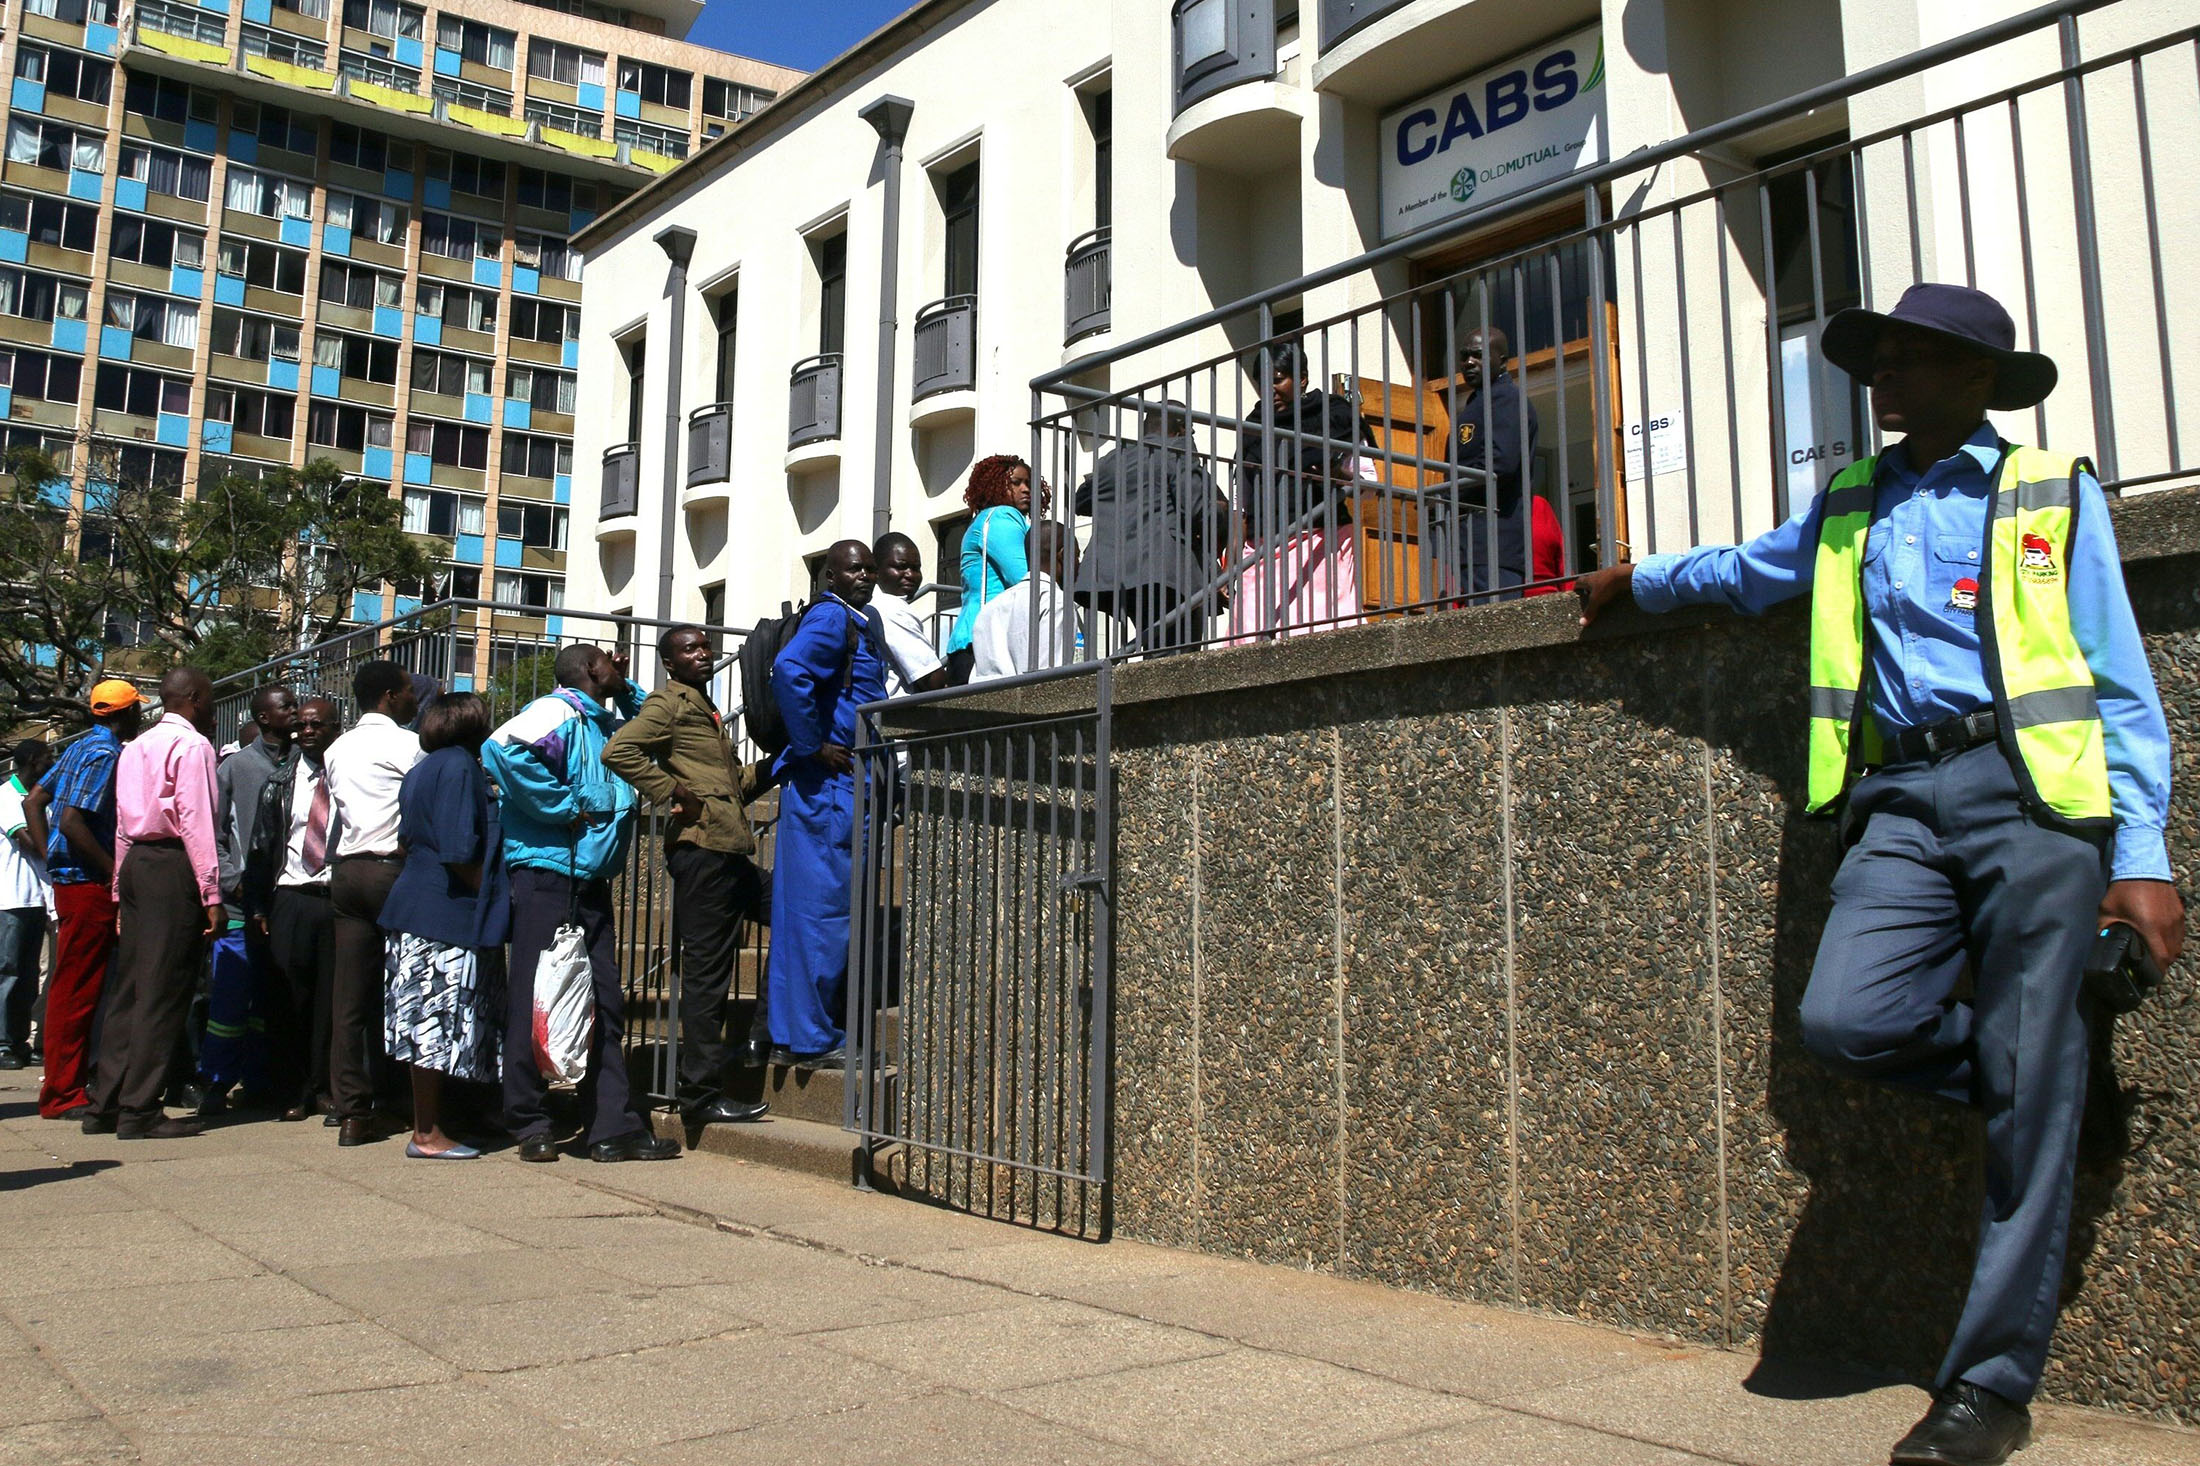 Zimbabweans queue to withdraw cash outside a bank on May 5, 2016 in Harare, Zimbabwe. Zimbabweans formed long queues outside banks on May 5 after the government slapped new limits on cash withdrawals and announced that 'bond notes' at par with the US dollar would be introduced. / AFP / JEKESAI NJIKIZANA (Photo credit should read JEKESAI NJIKIZANA/AFP/Getty Images)
